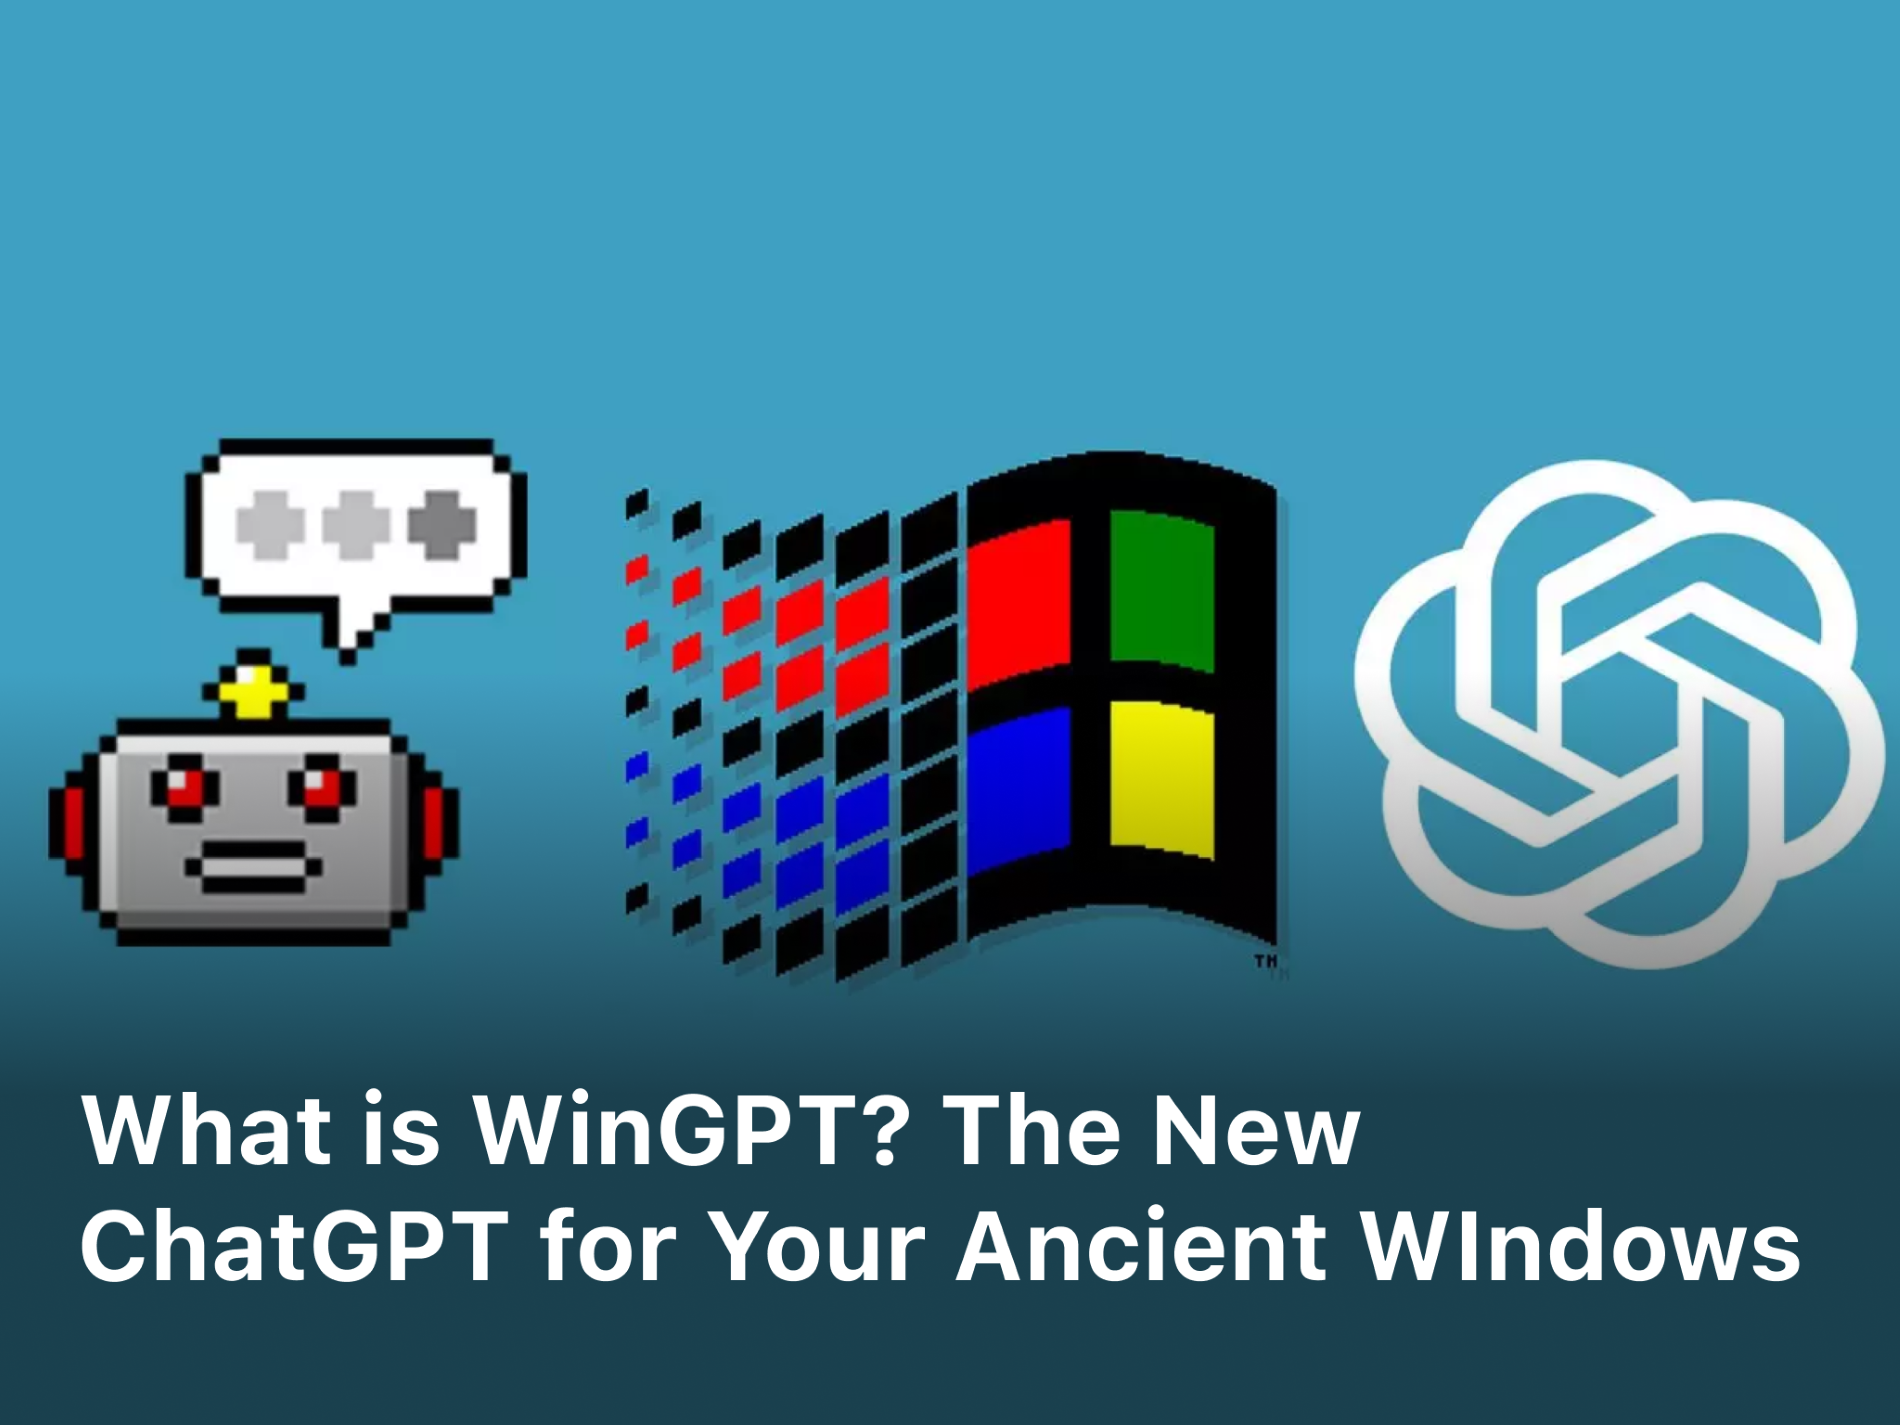 What is WinGPT